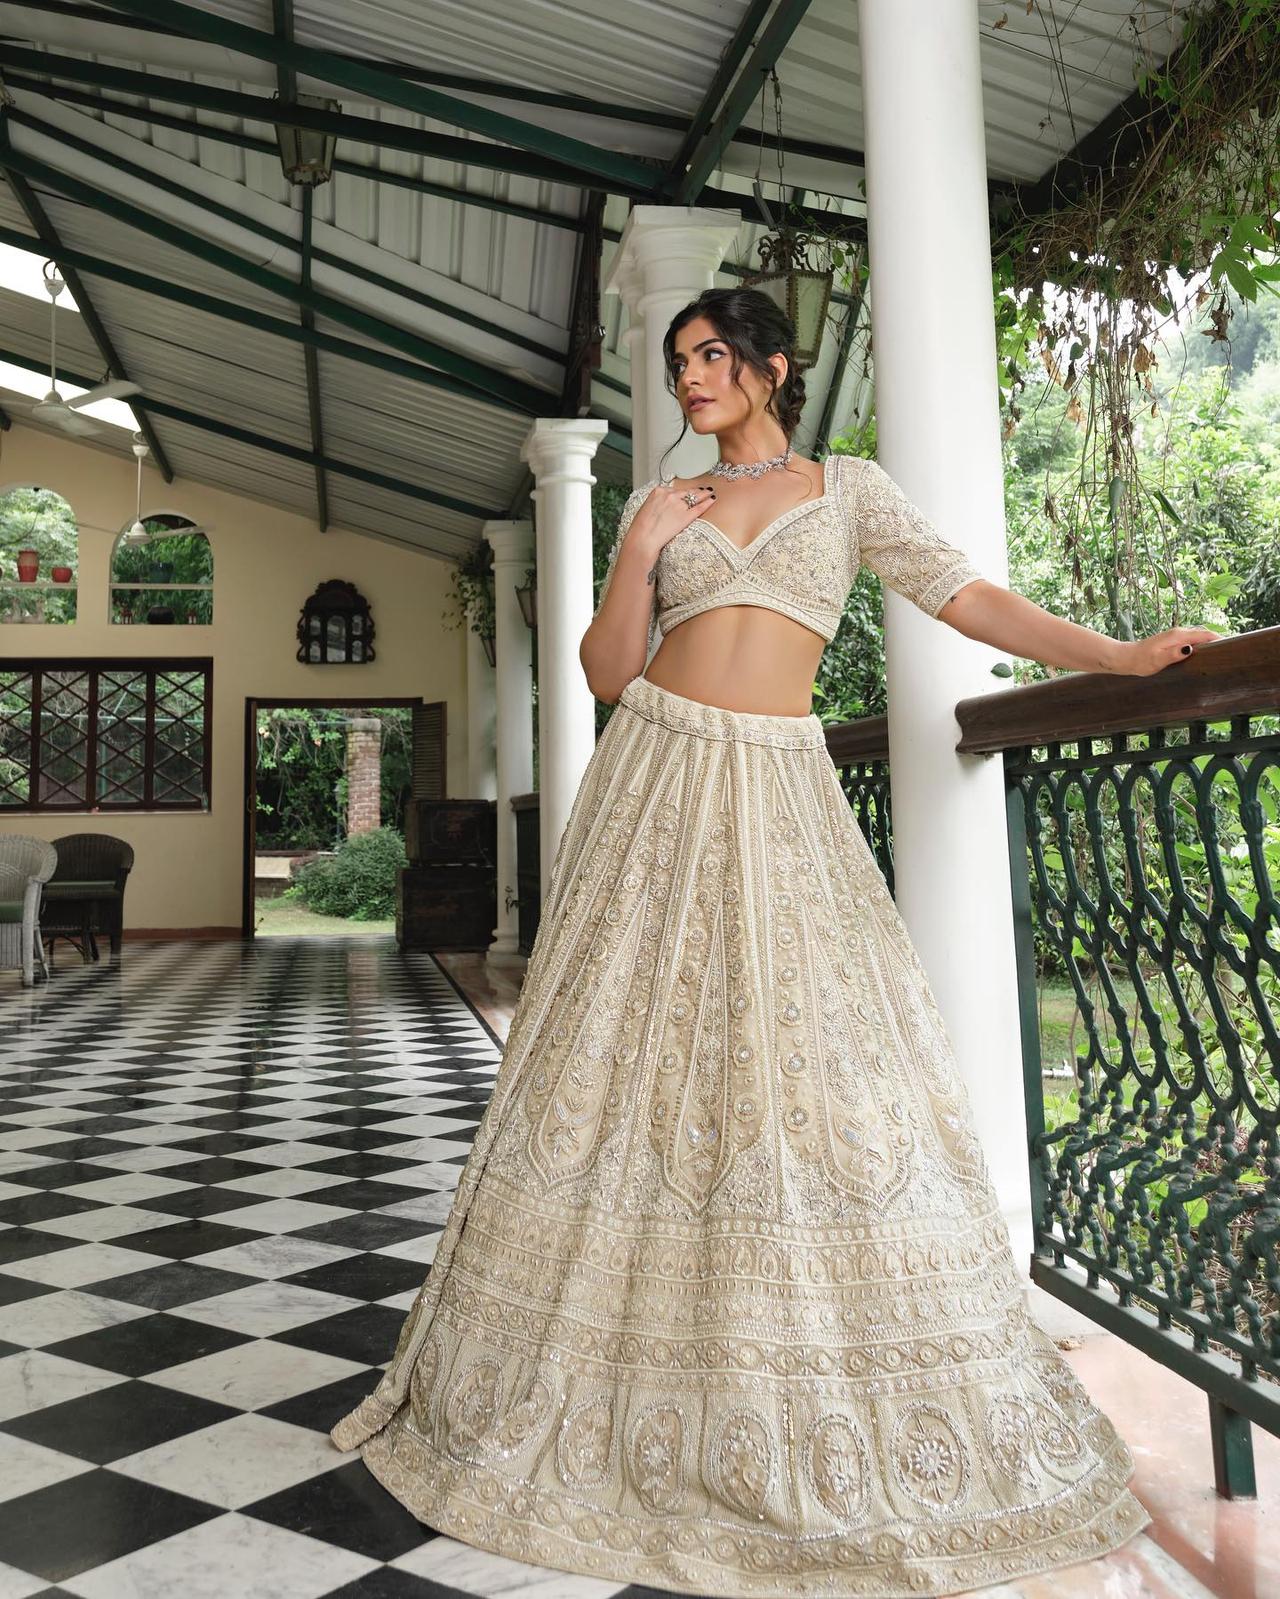 200+ Latest and Best Indian Wedding Dresses for Women and Girls of